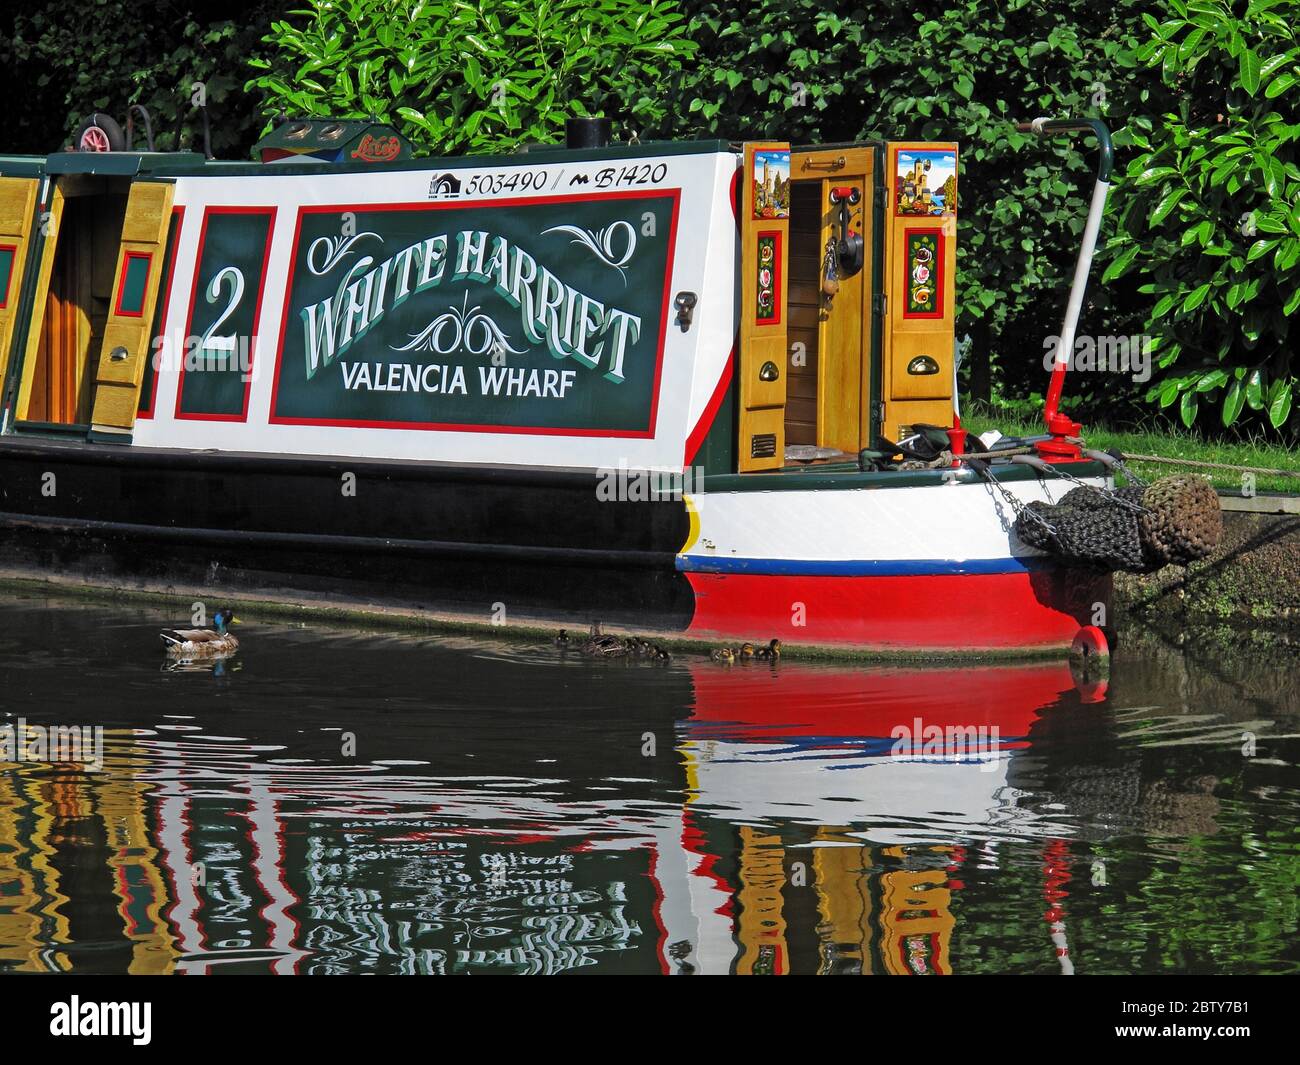 503490 ,B1420 White Harriet Valencia Wharf narrowboat, barge sur canal , Cheshire, Angleterre, Royaume-Uni, réflexion Banque D'Images